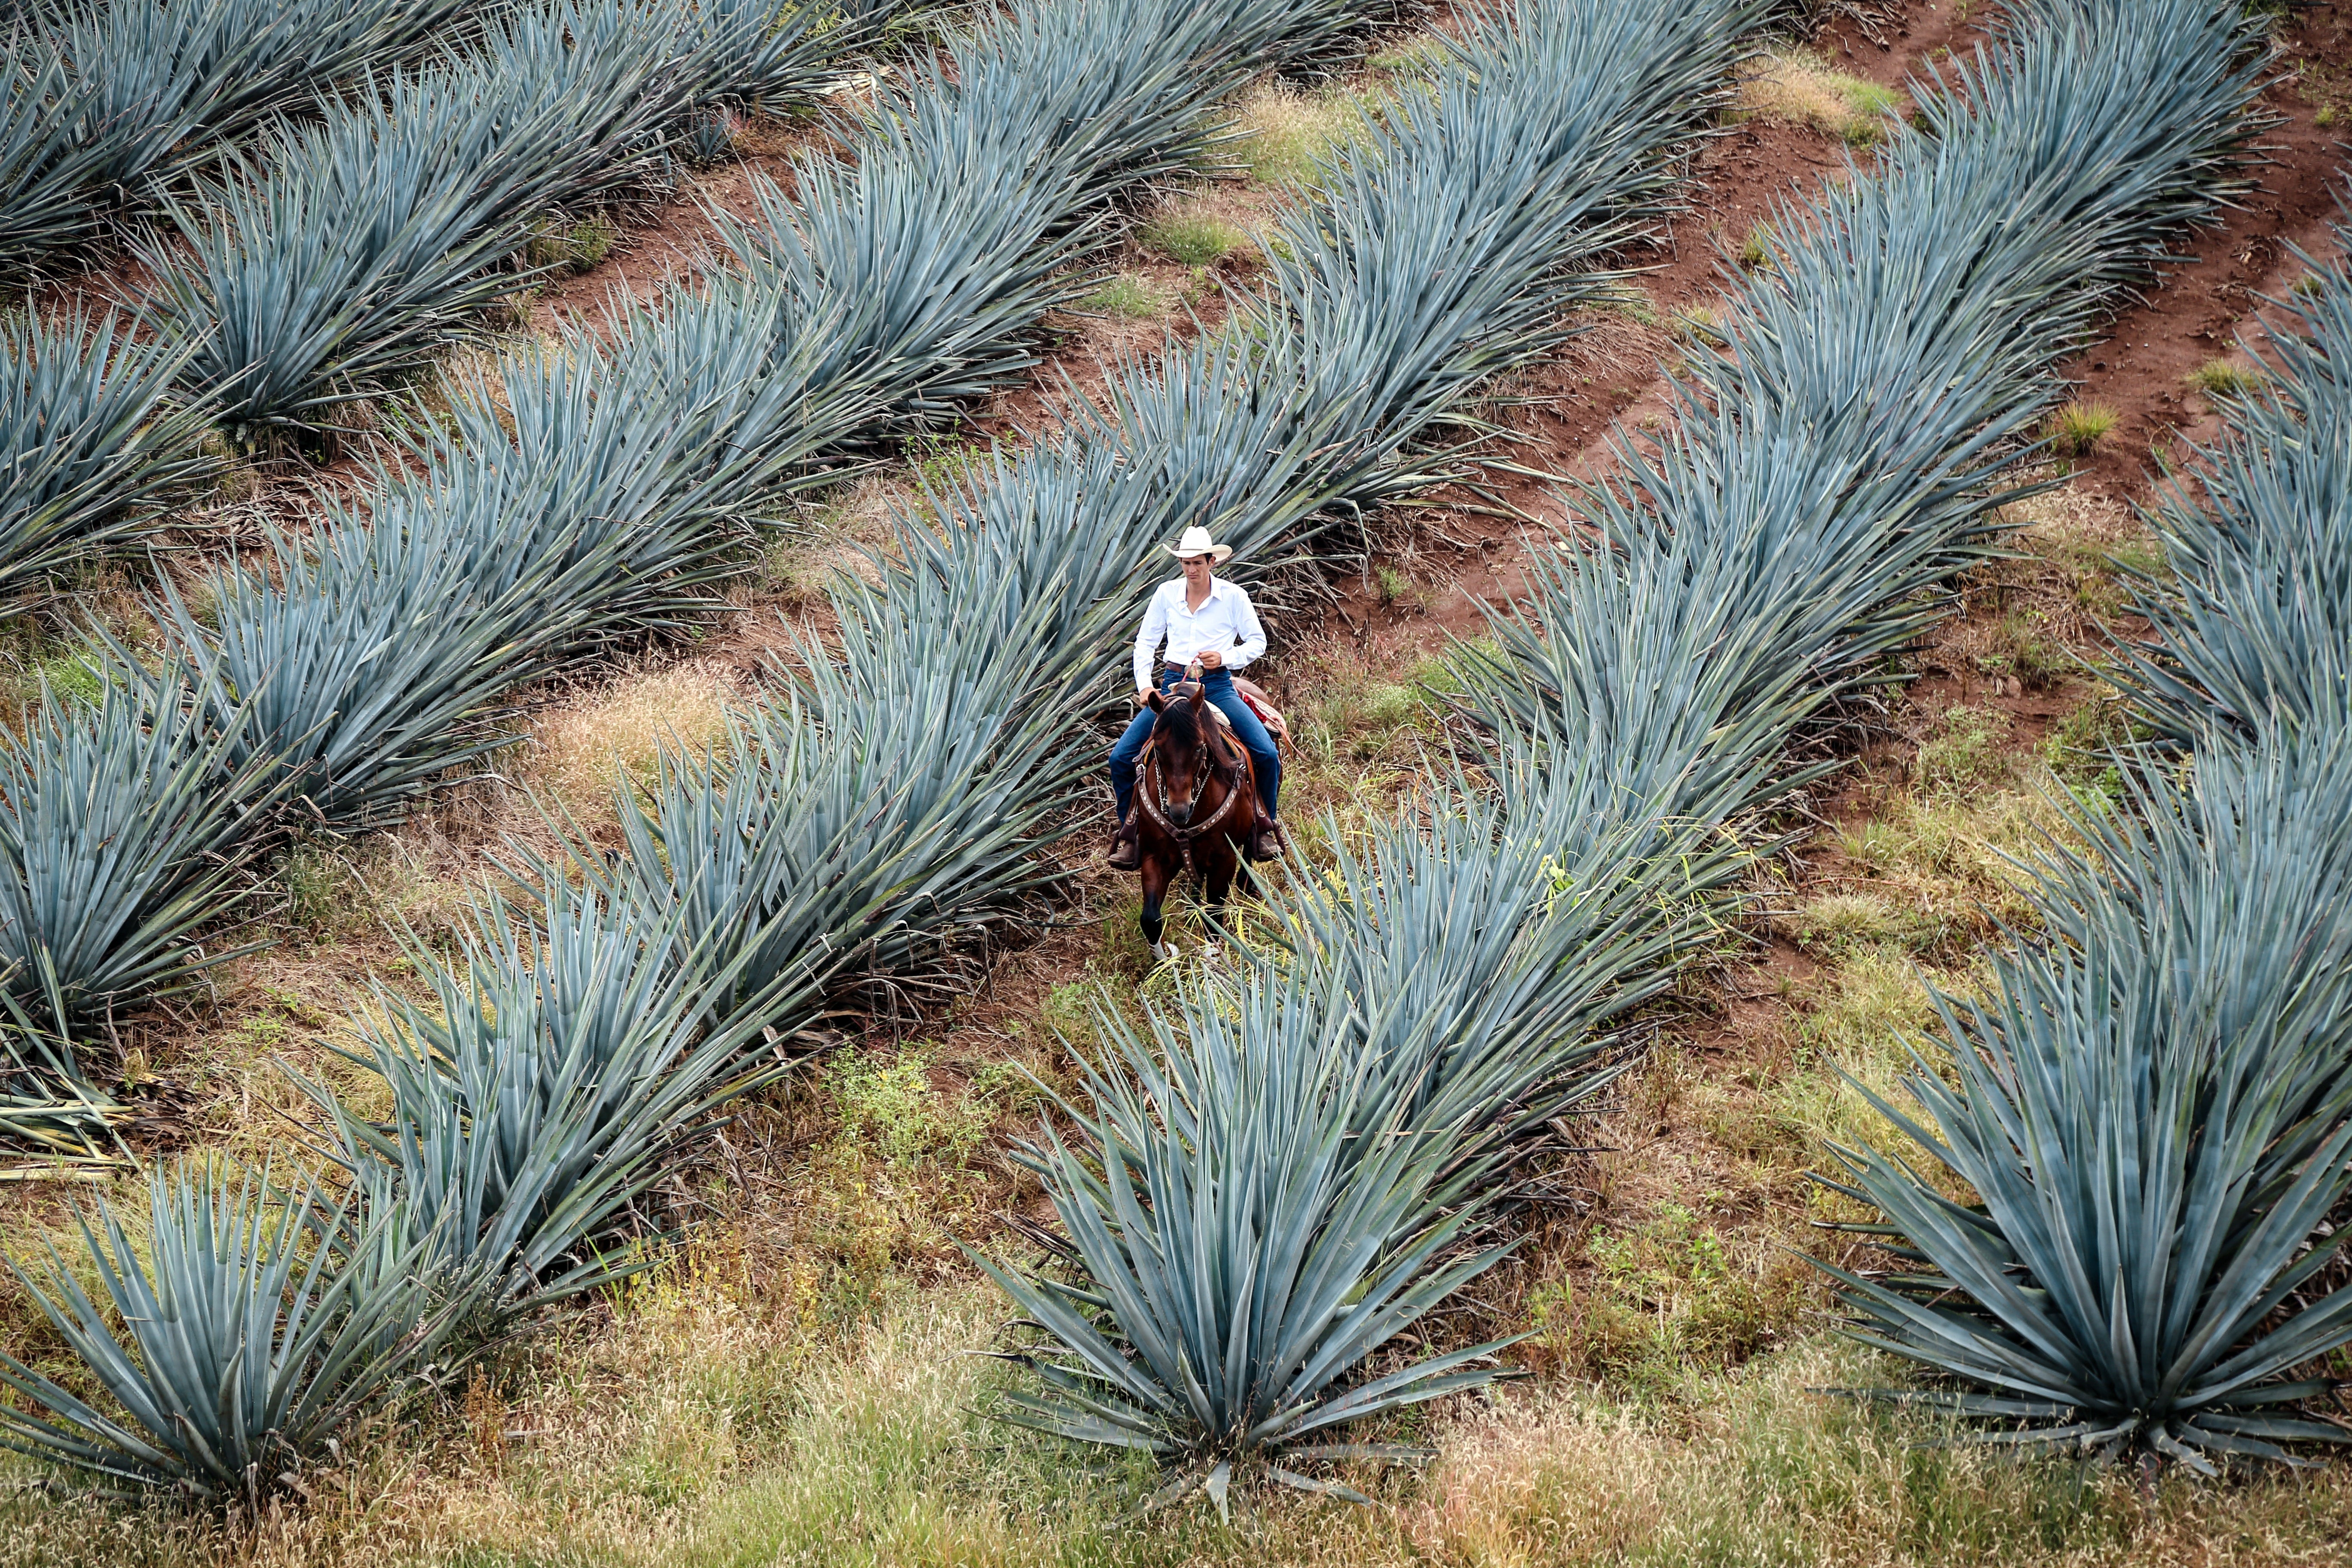 A traditional Agave farmer rides on a horse through fields of Agave.